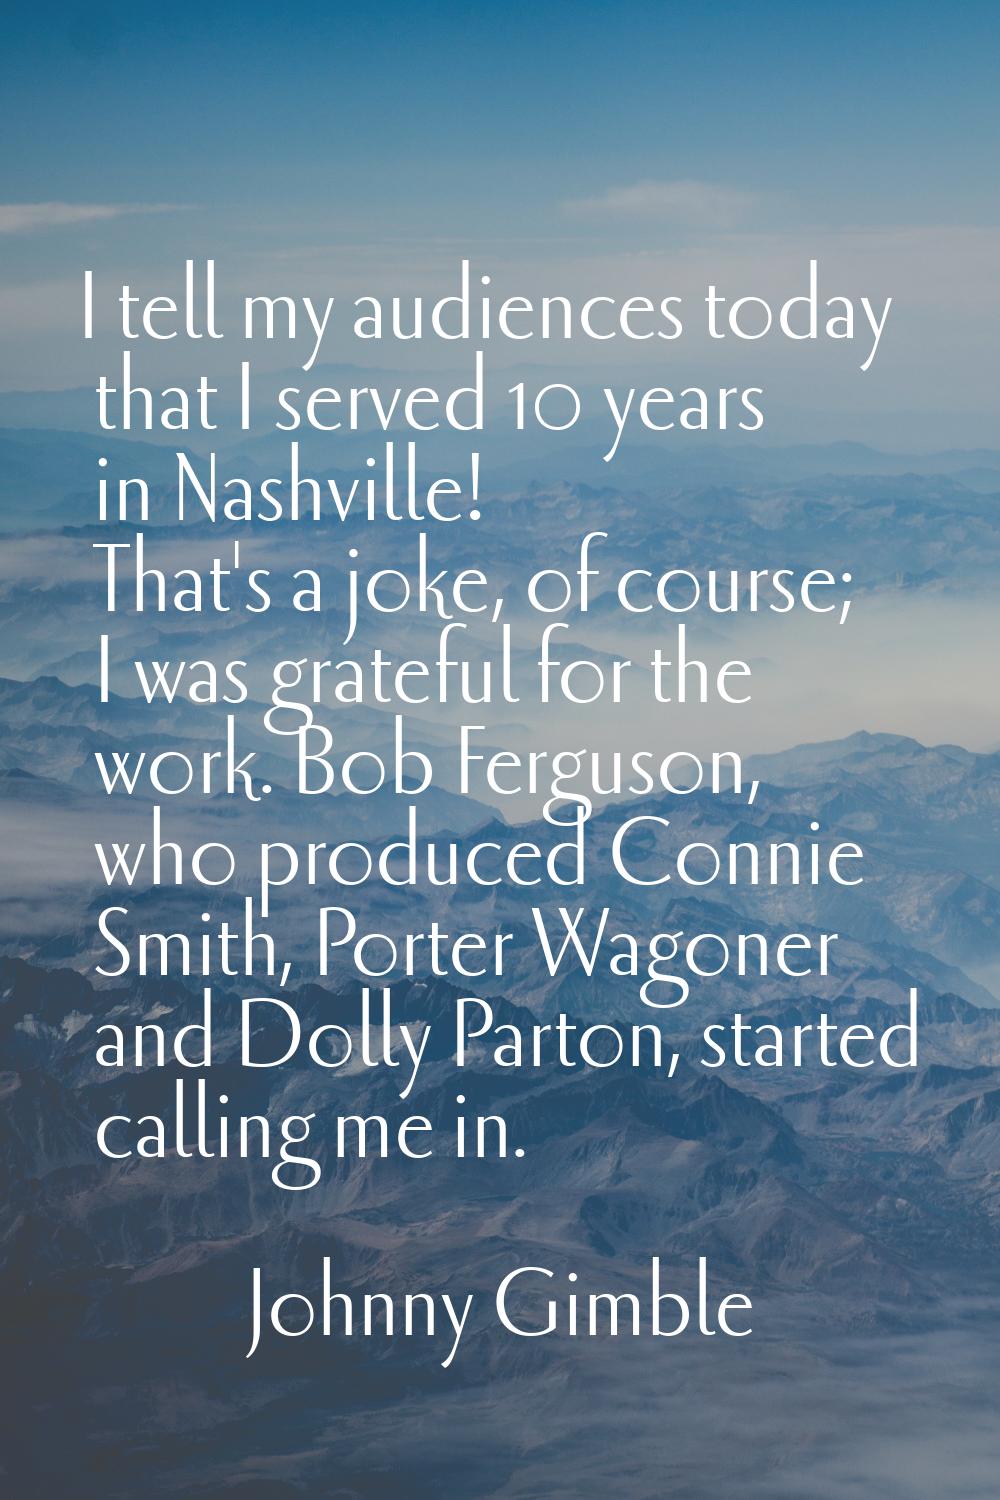 I tell my audiences today that I served 10 years in Nashville! That's a joke, of course; I was grat